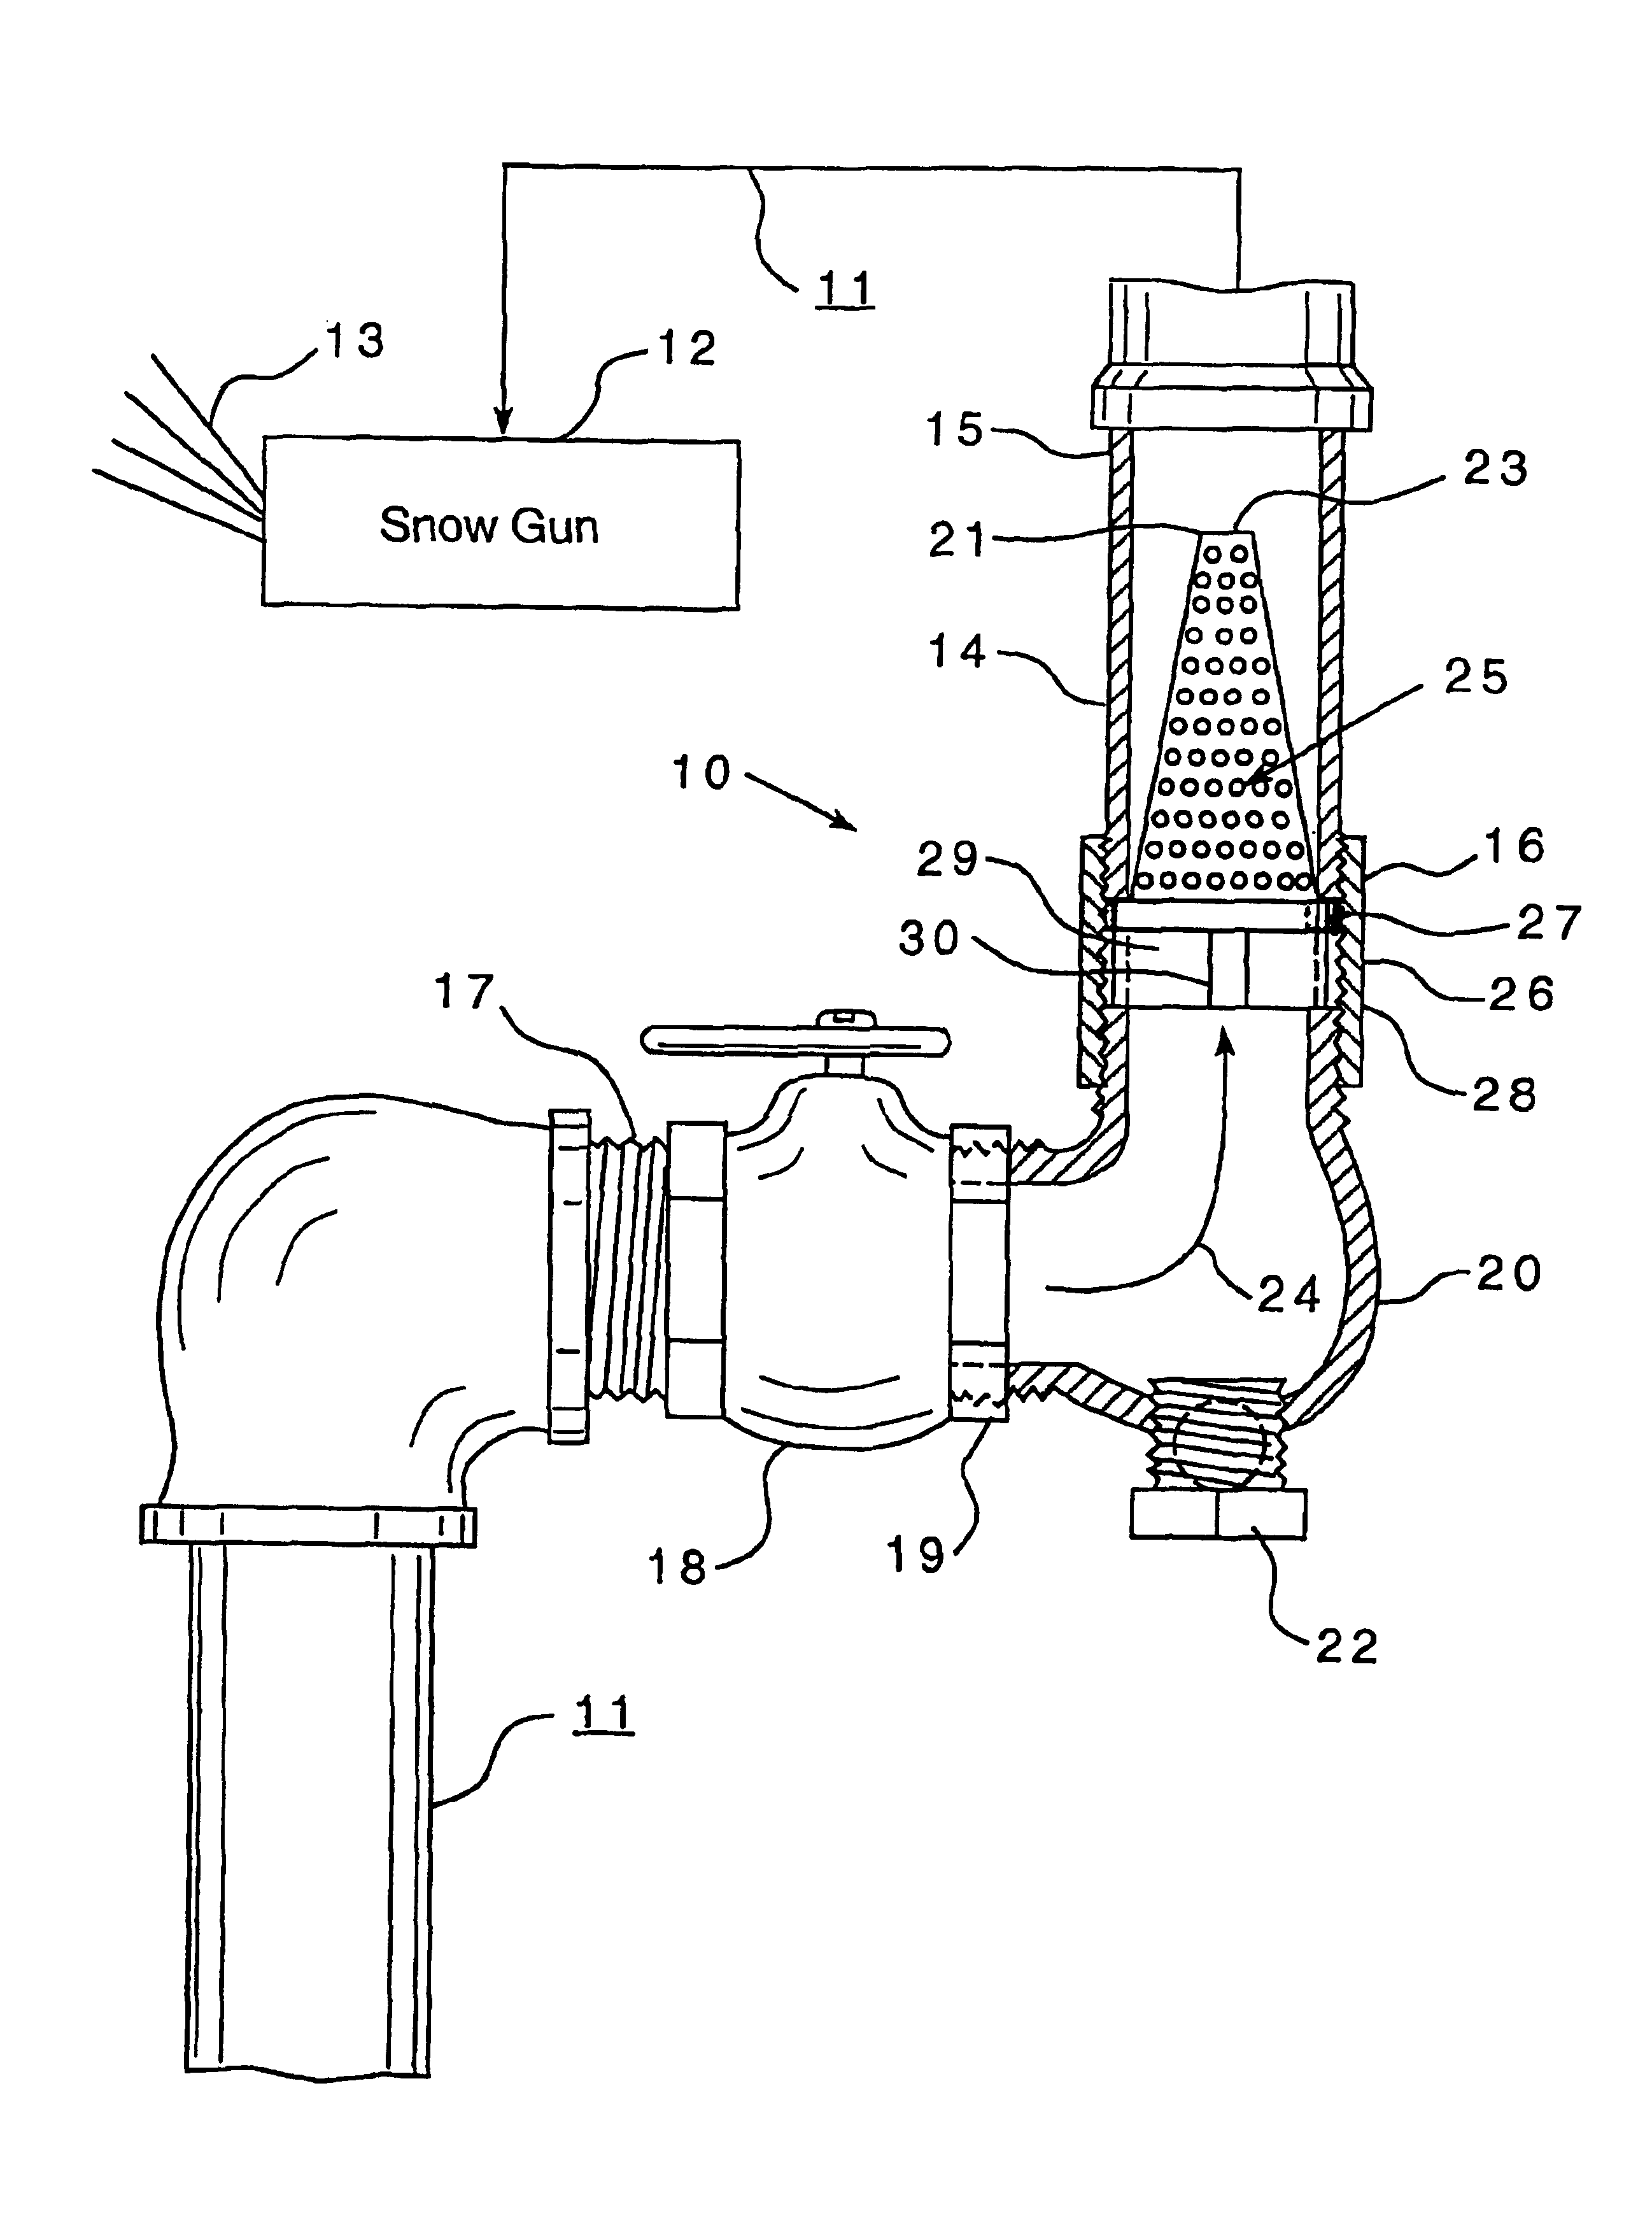 Fluid filter system for snow making apparatus